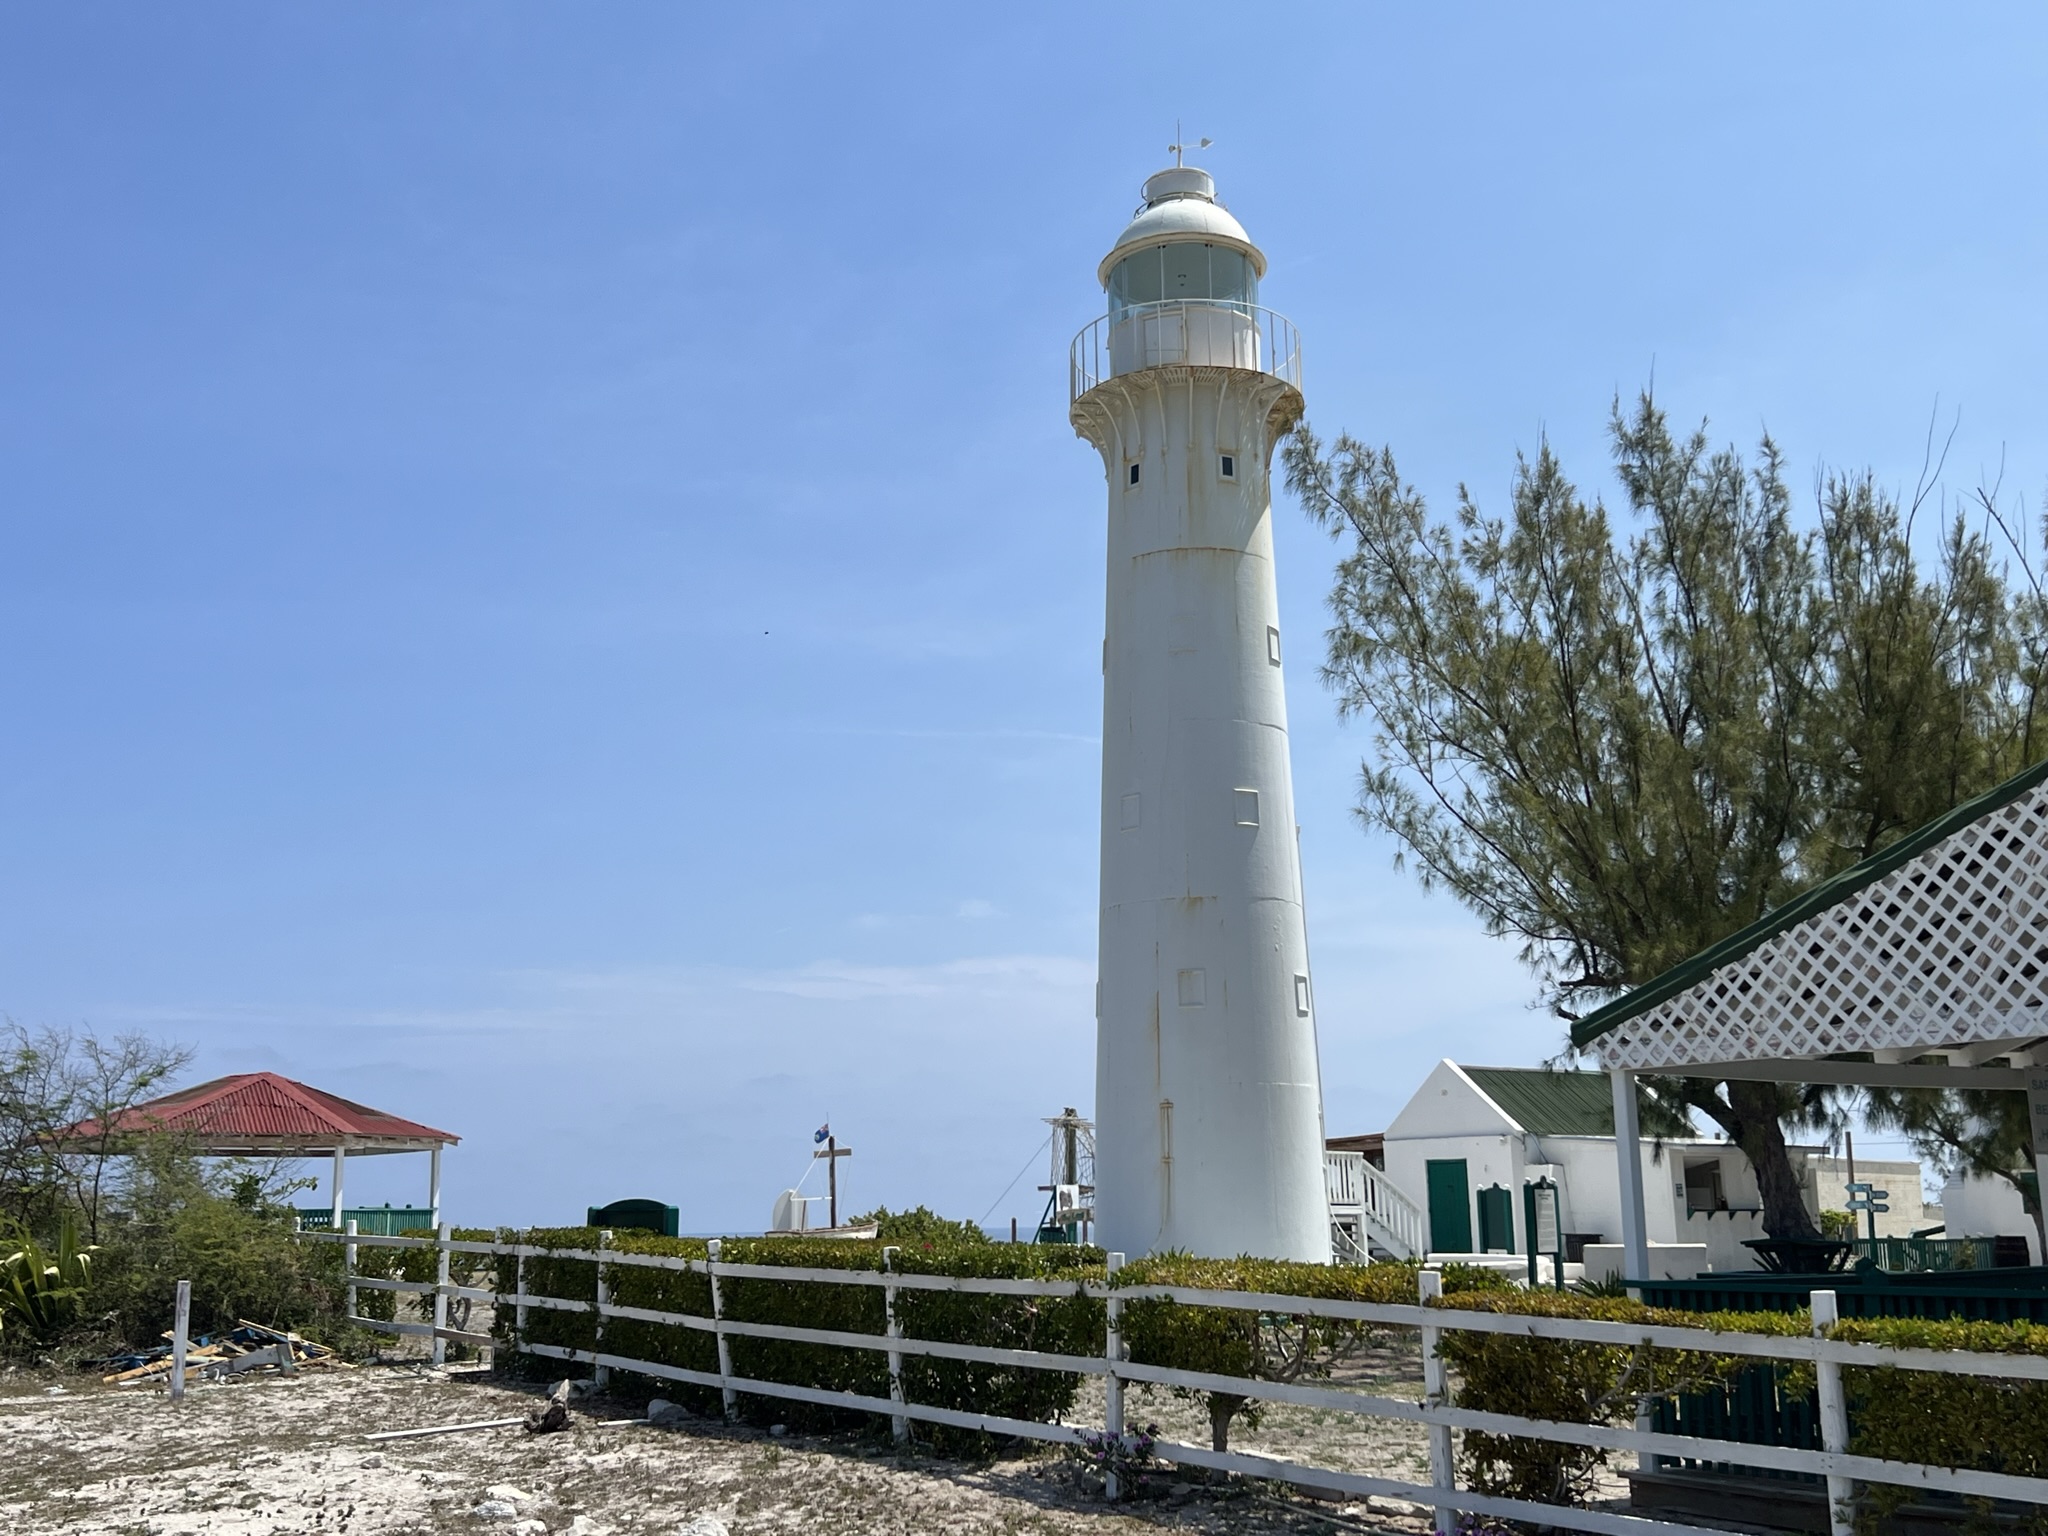 Cruise Shore Excursions – Grand Turk Tram Tour of Historic Grand Turk Island in the Turks and